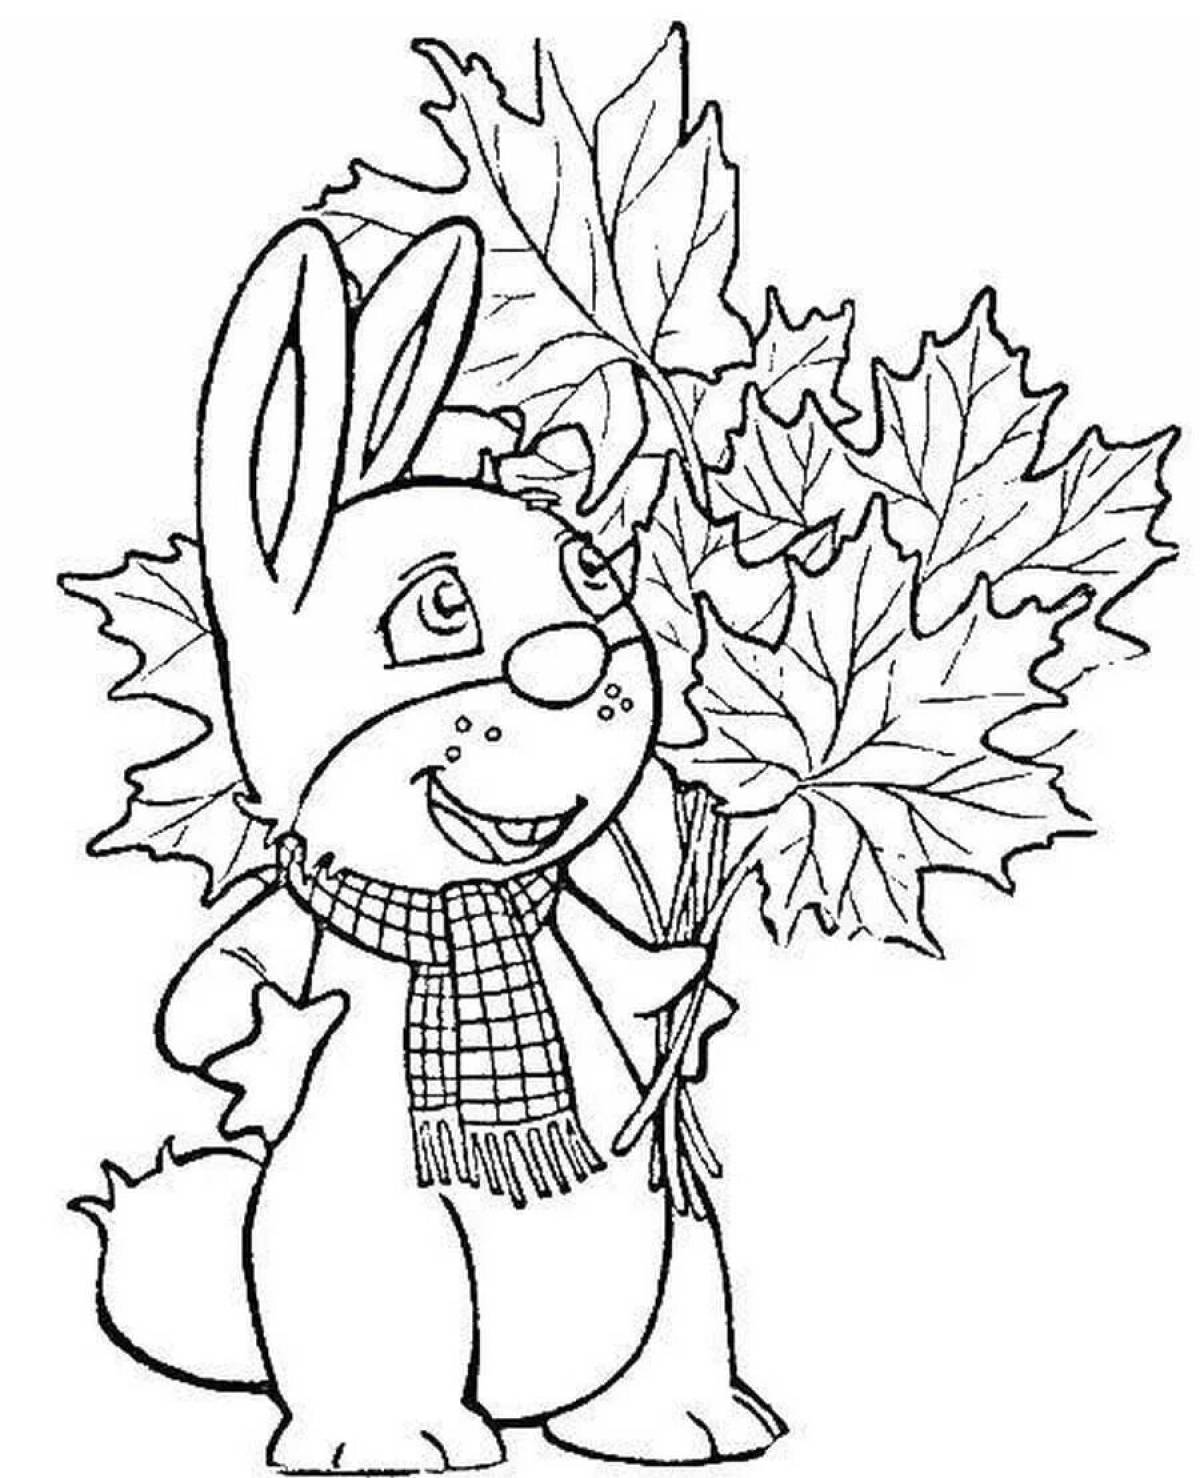 Inspiring Autumn Bouquet Coloring Page